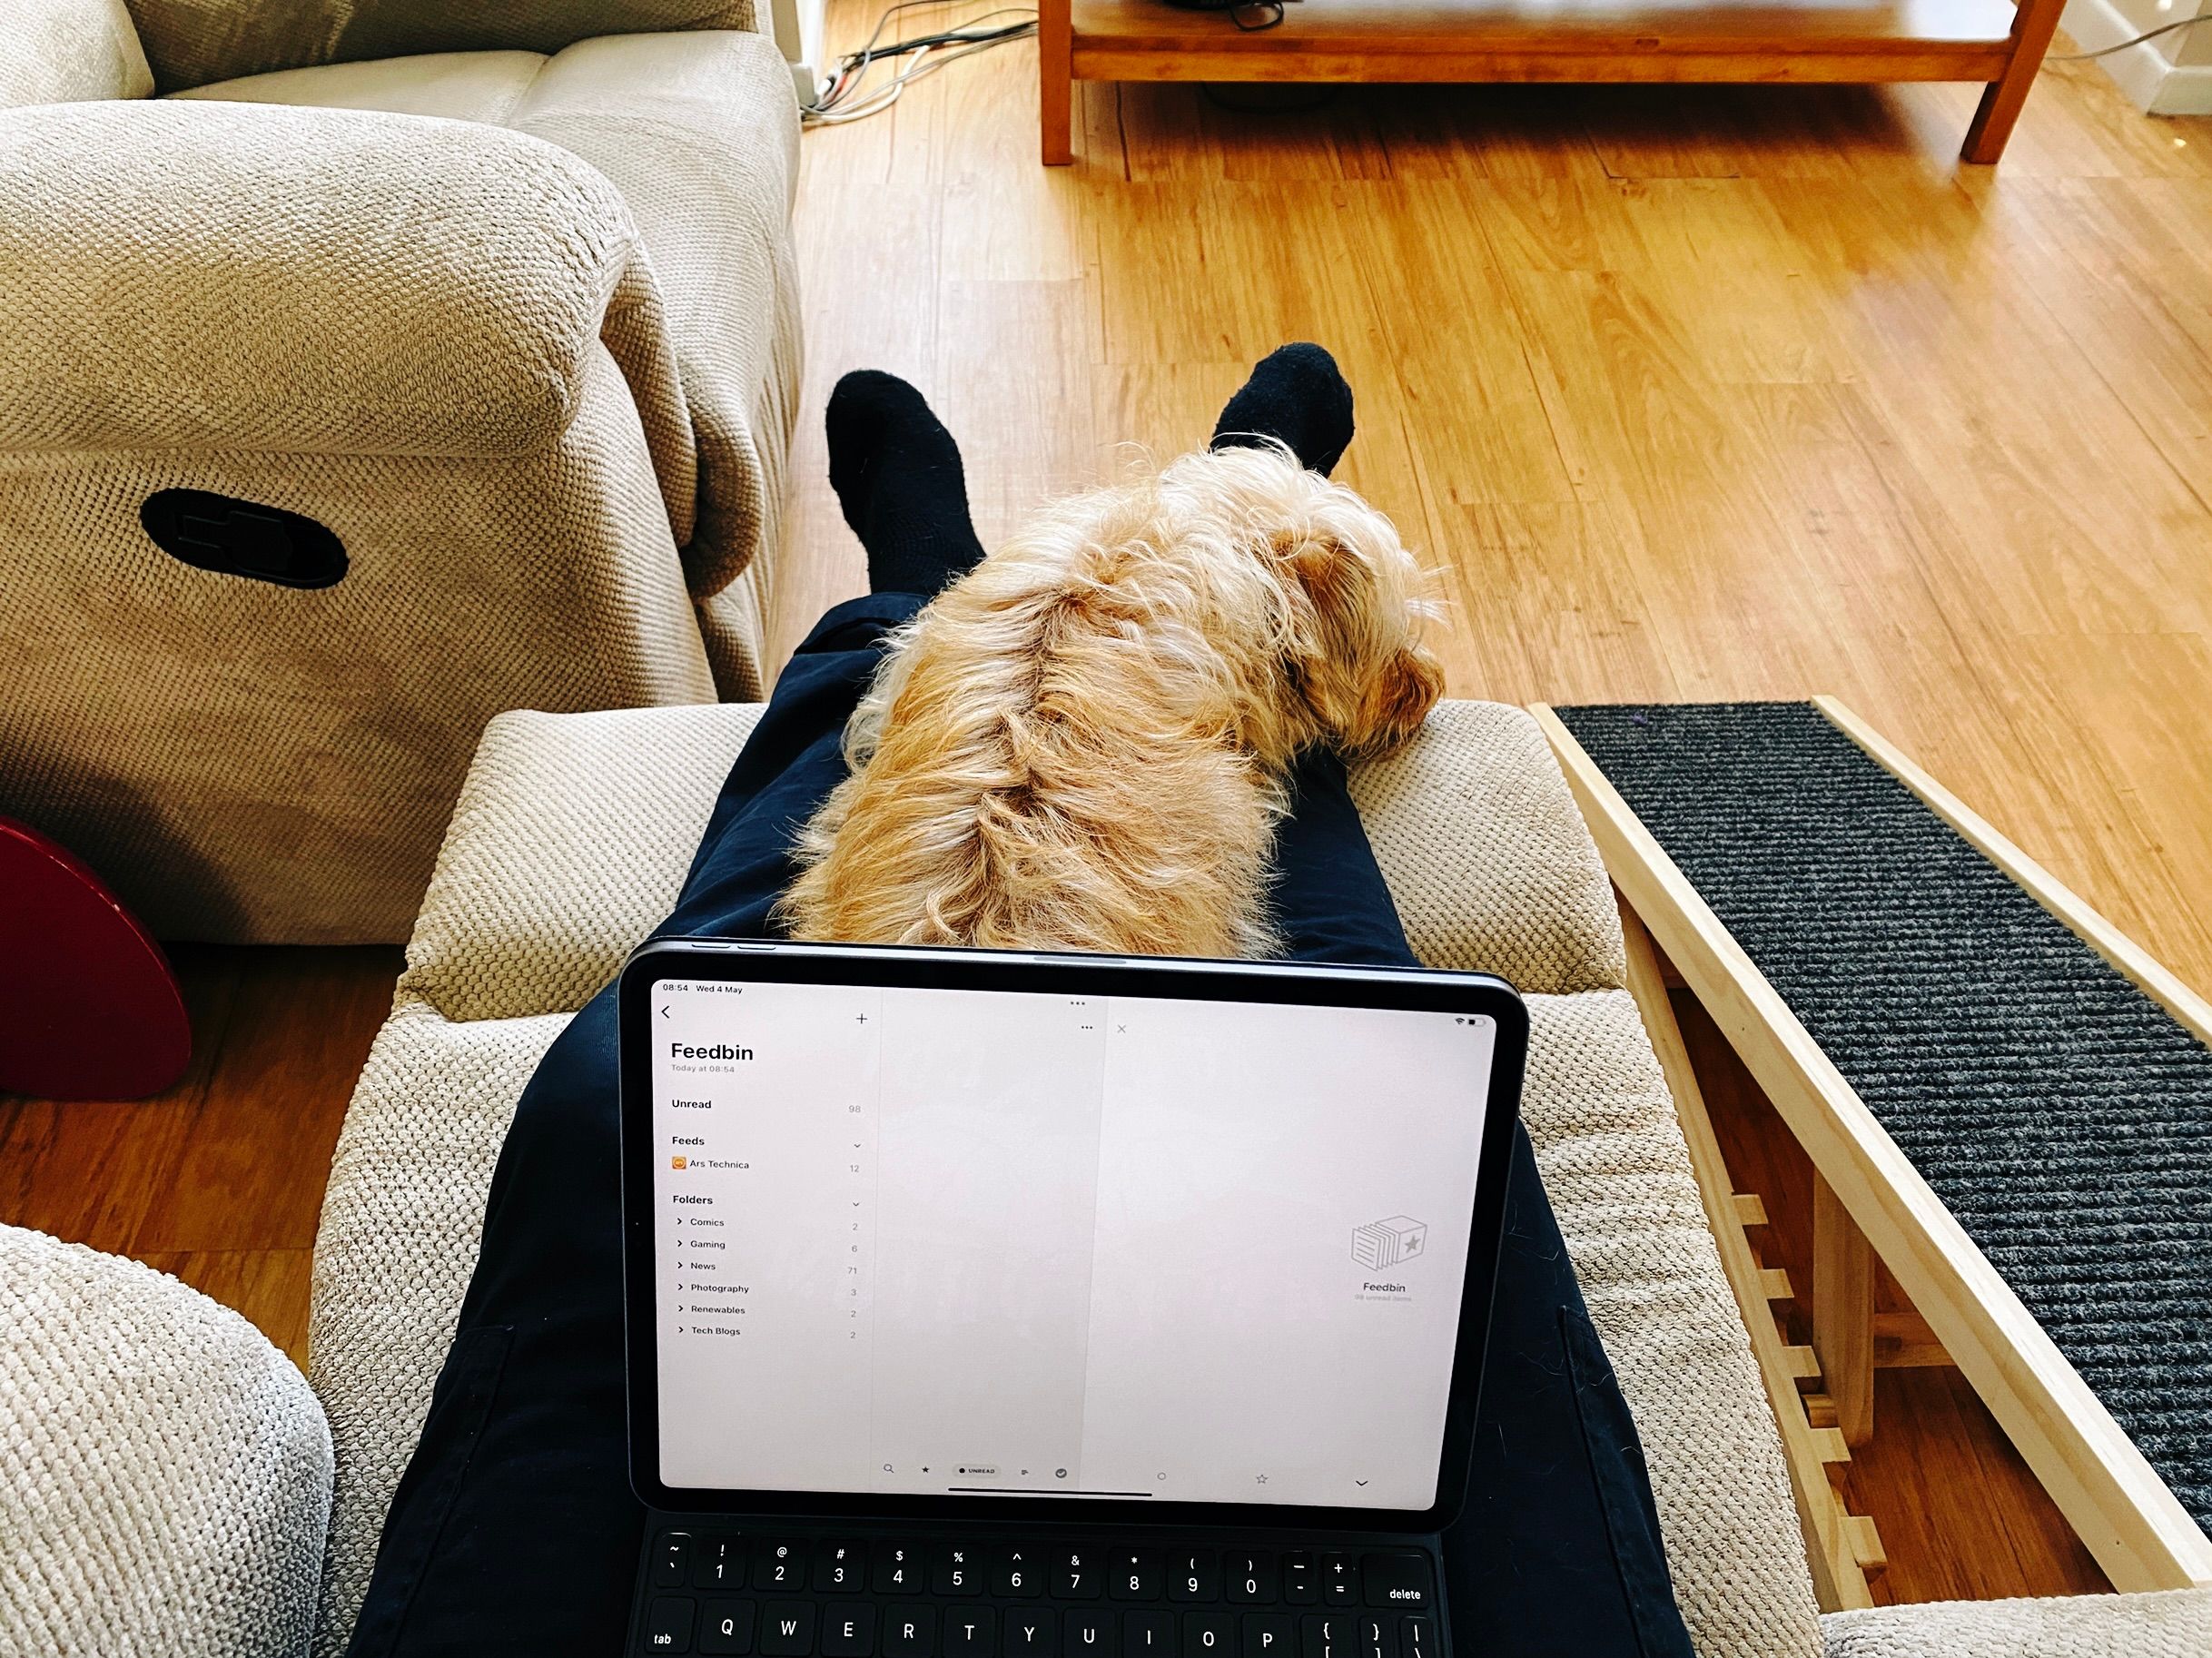 A photo taken from my perspective, I'm sitting on a recliner lounge with my feet up, have an iPad in my lap, and there's a small scruffy blonde dog lying between my legs with his head resting on my shin.